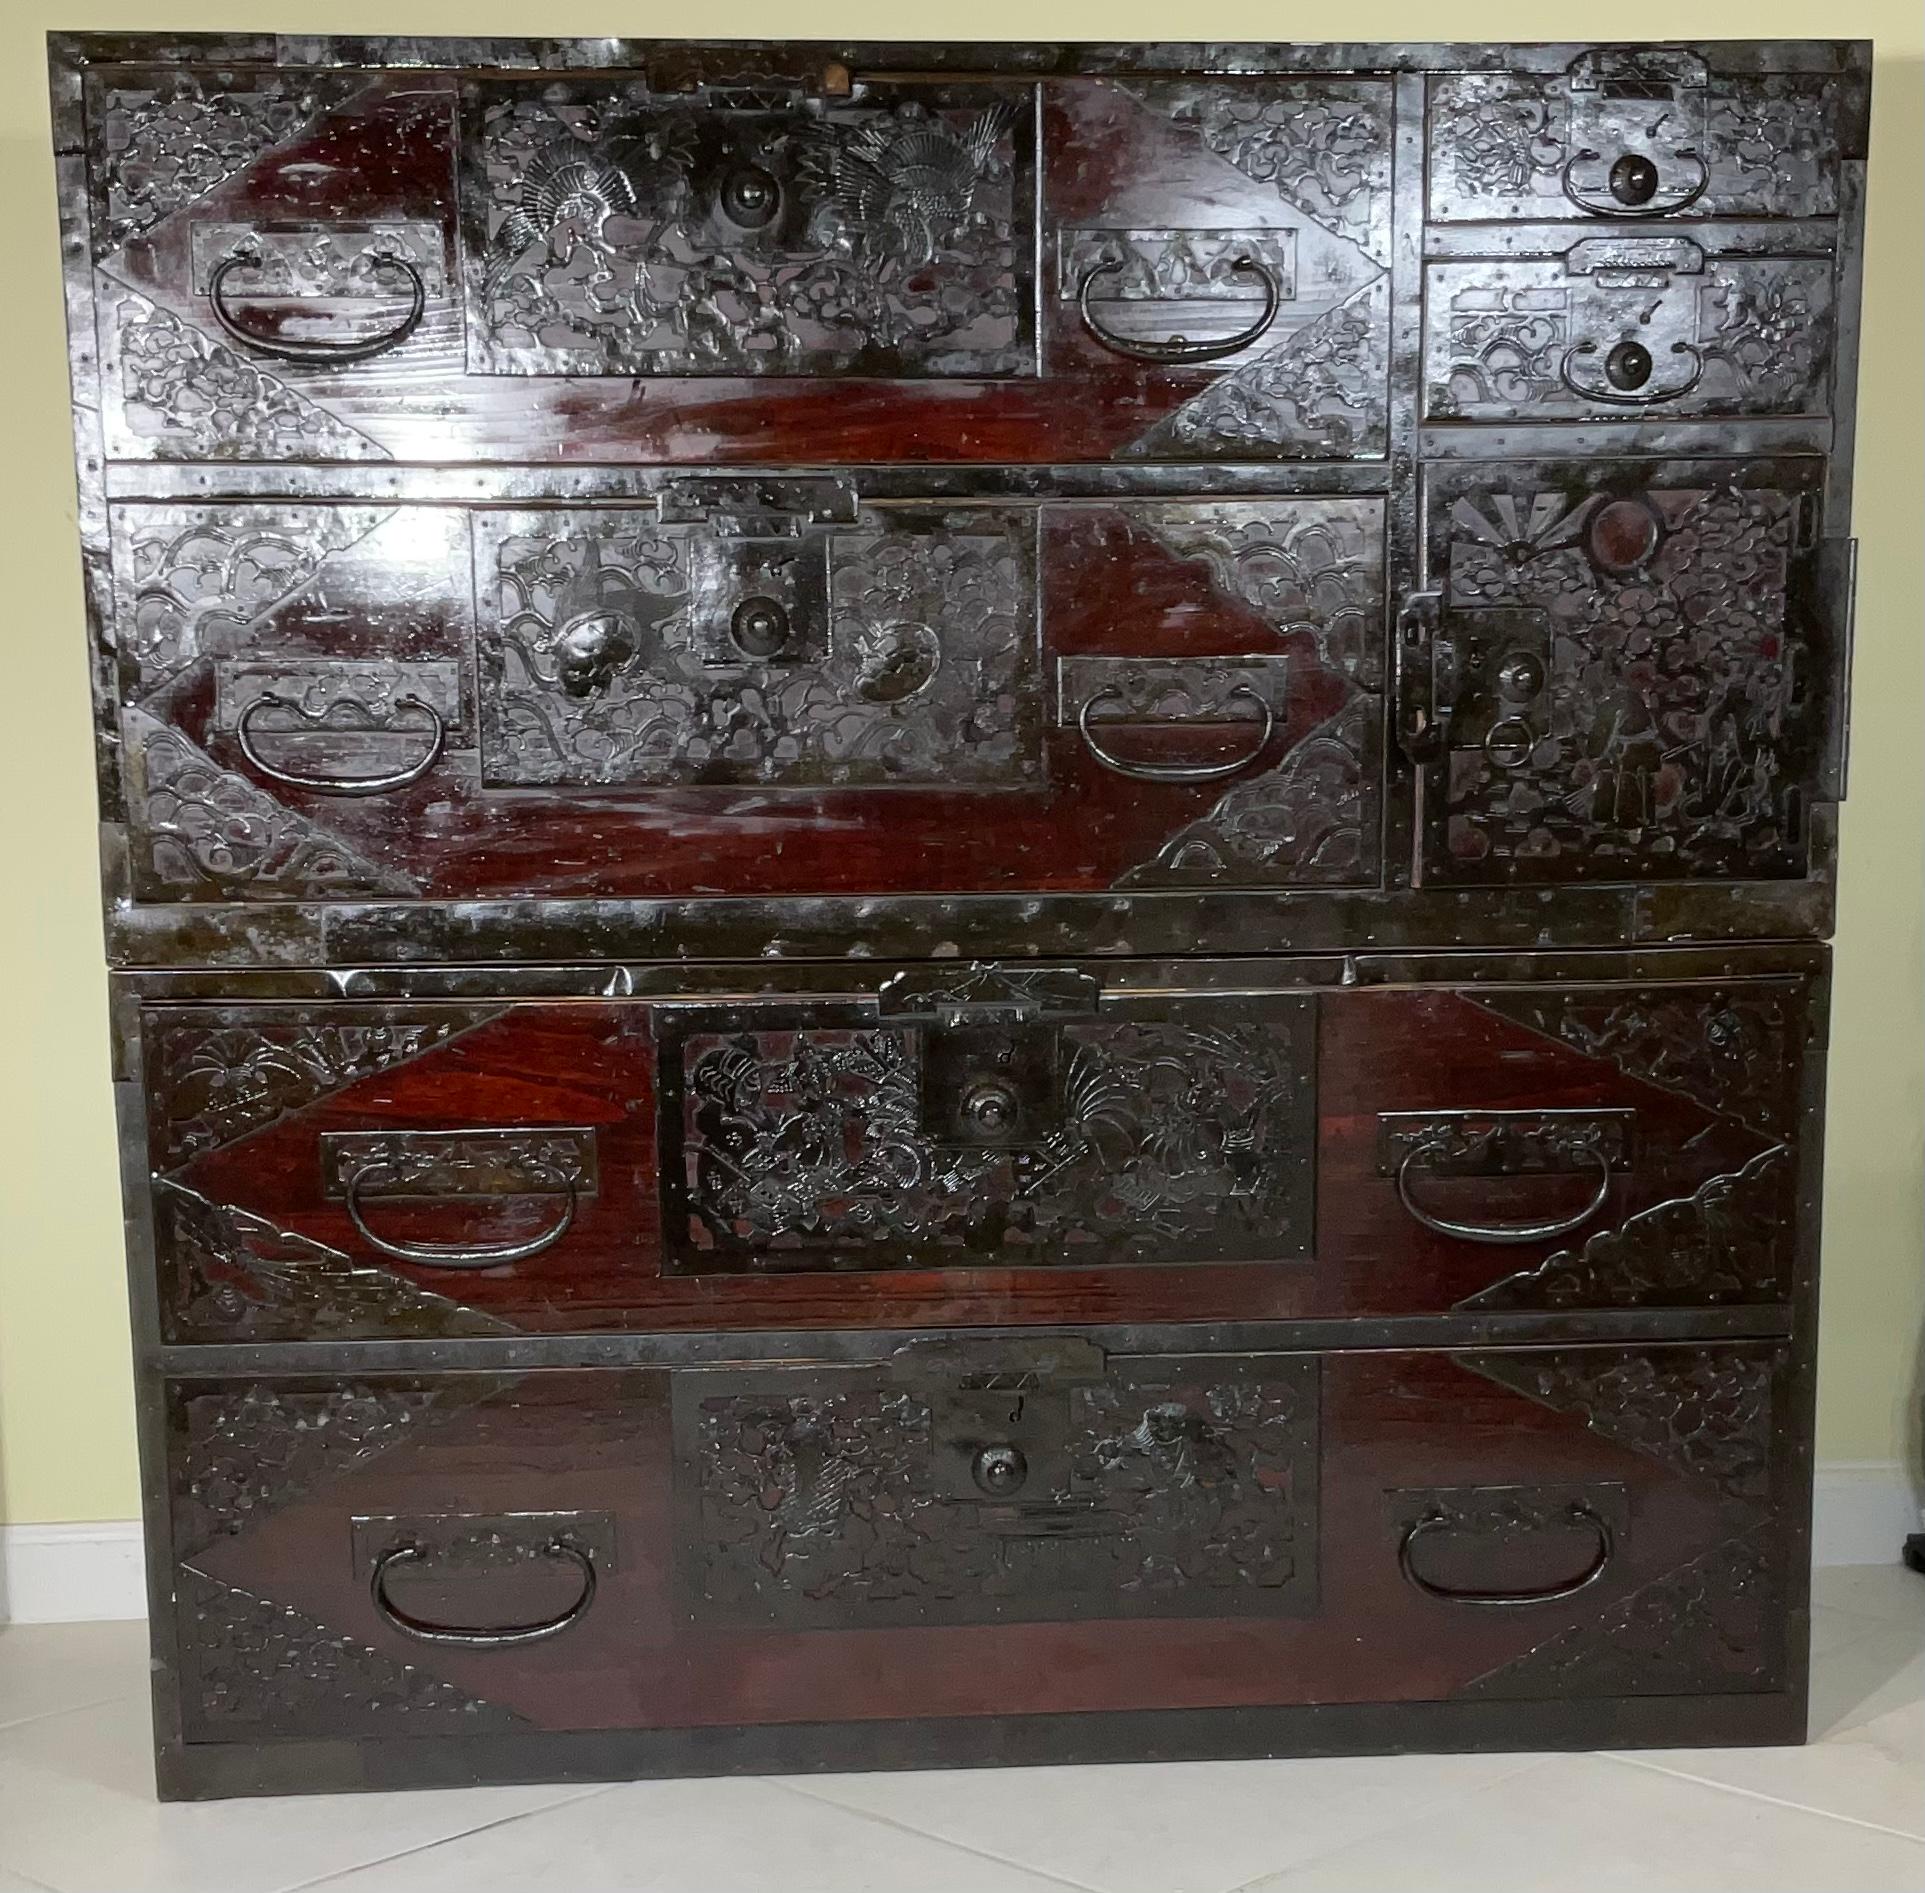 A Japanese Meiji two-part tansu chest from the mid 19th century, with Metal hardware of hand etching, vivid motifs of Woman birds turtles and even one bunny This wooden chest is a fine example of Japan's traditional mobile cabinetry. Featuring a